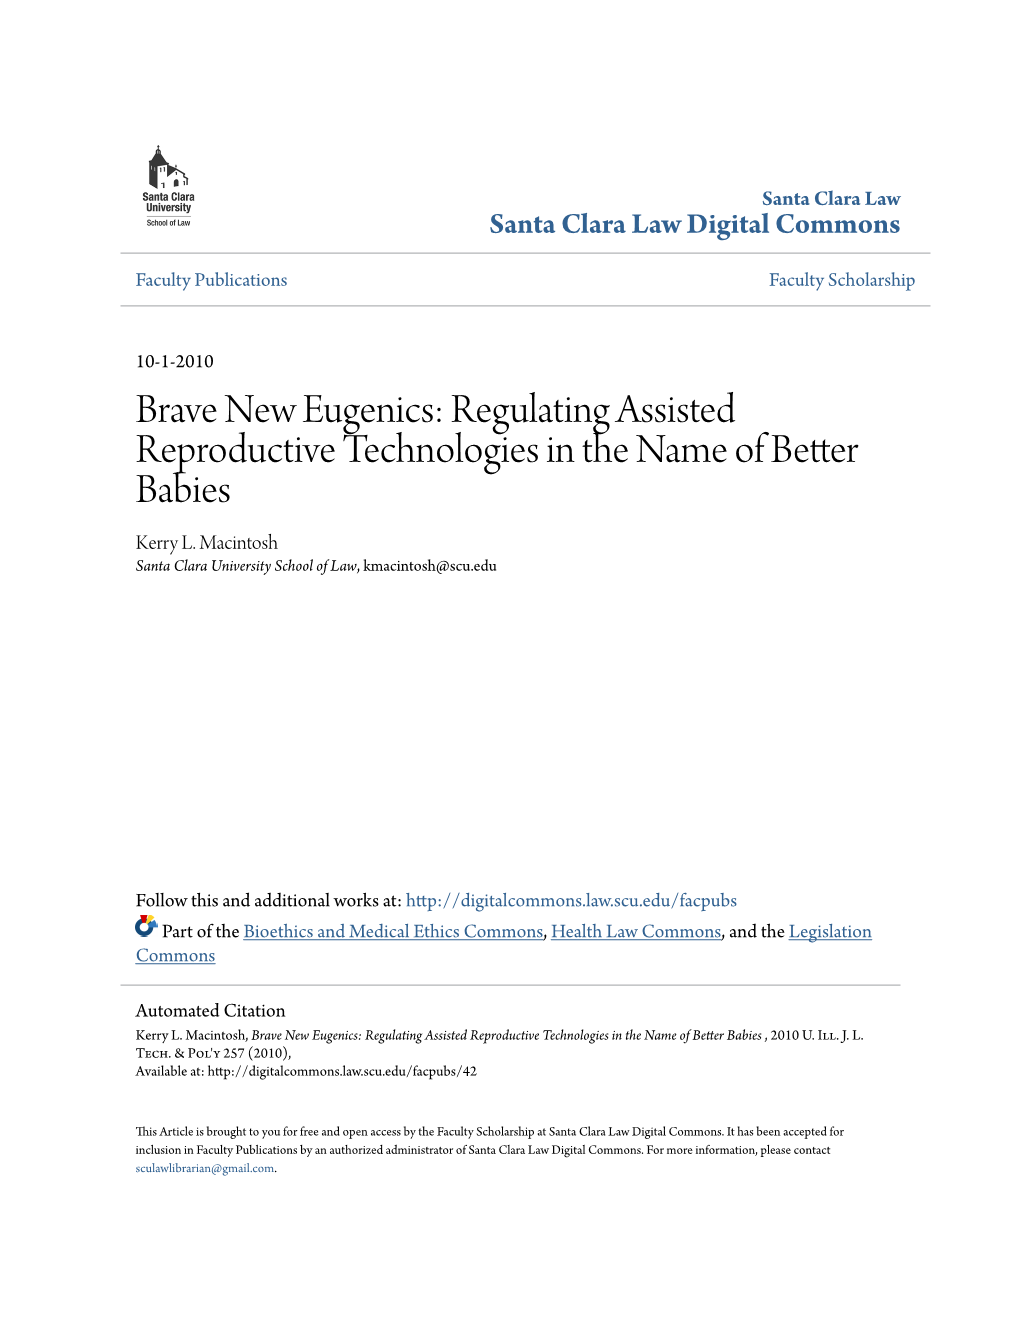 Brave New Eugenics: Regulating Assisted Reproductive Technologies in the Name of Better Babies Kerry L